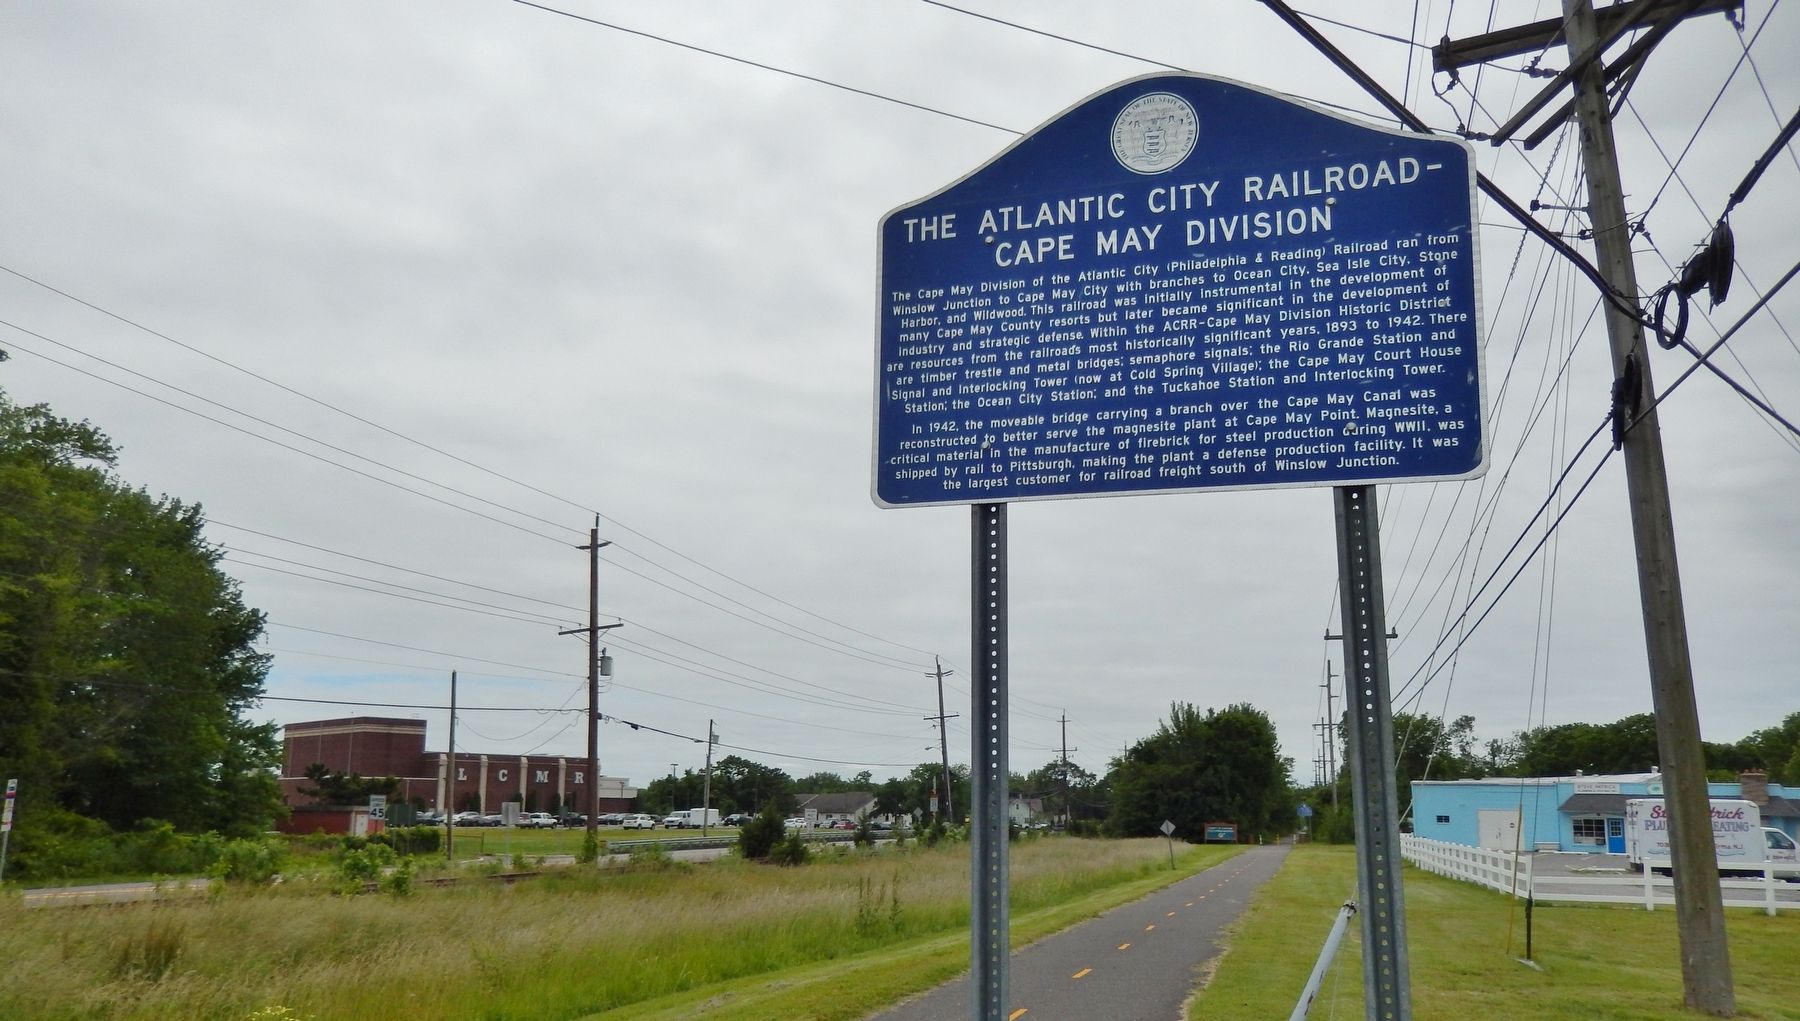 Atlantic City Railroad - Cape May Division Marker (<i>wide view</i>) image. Click for full size.